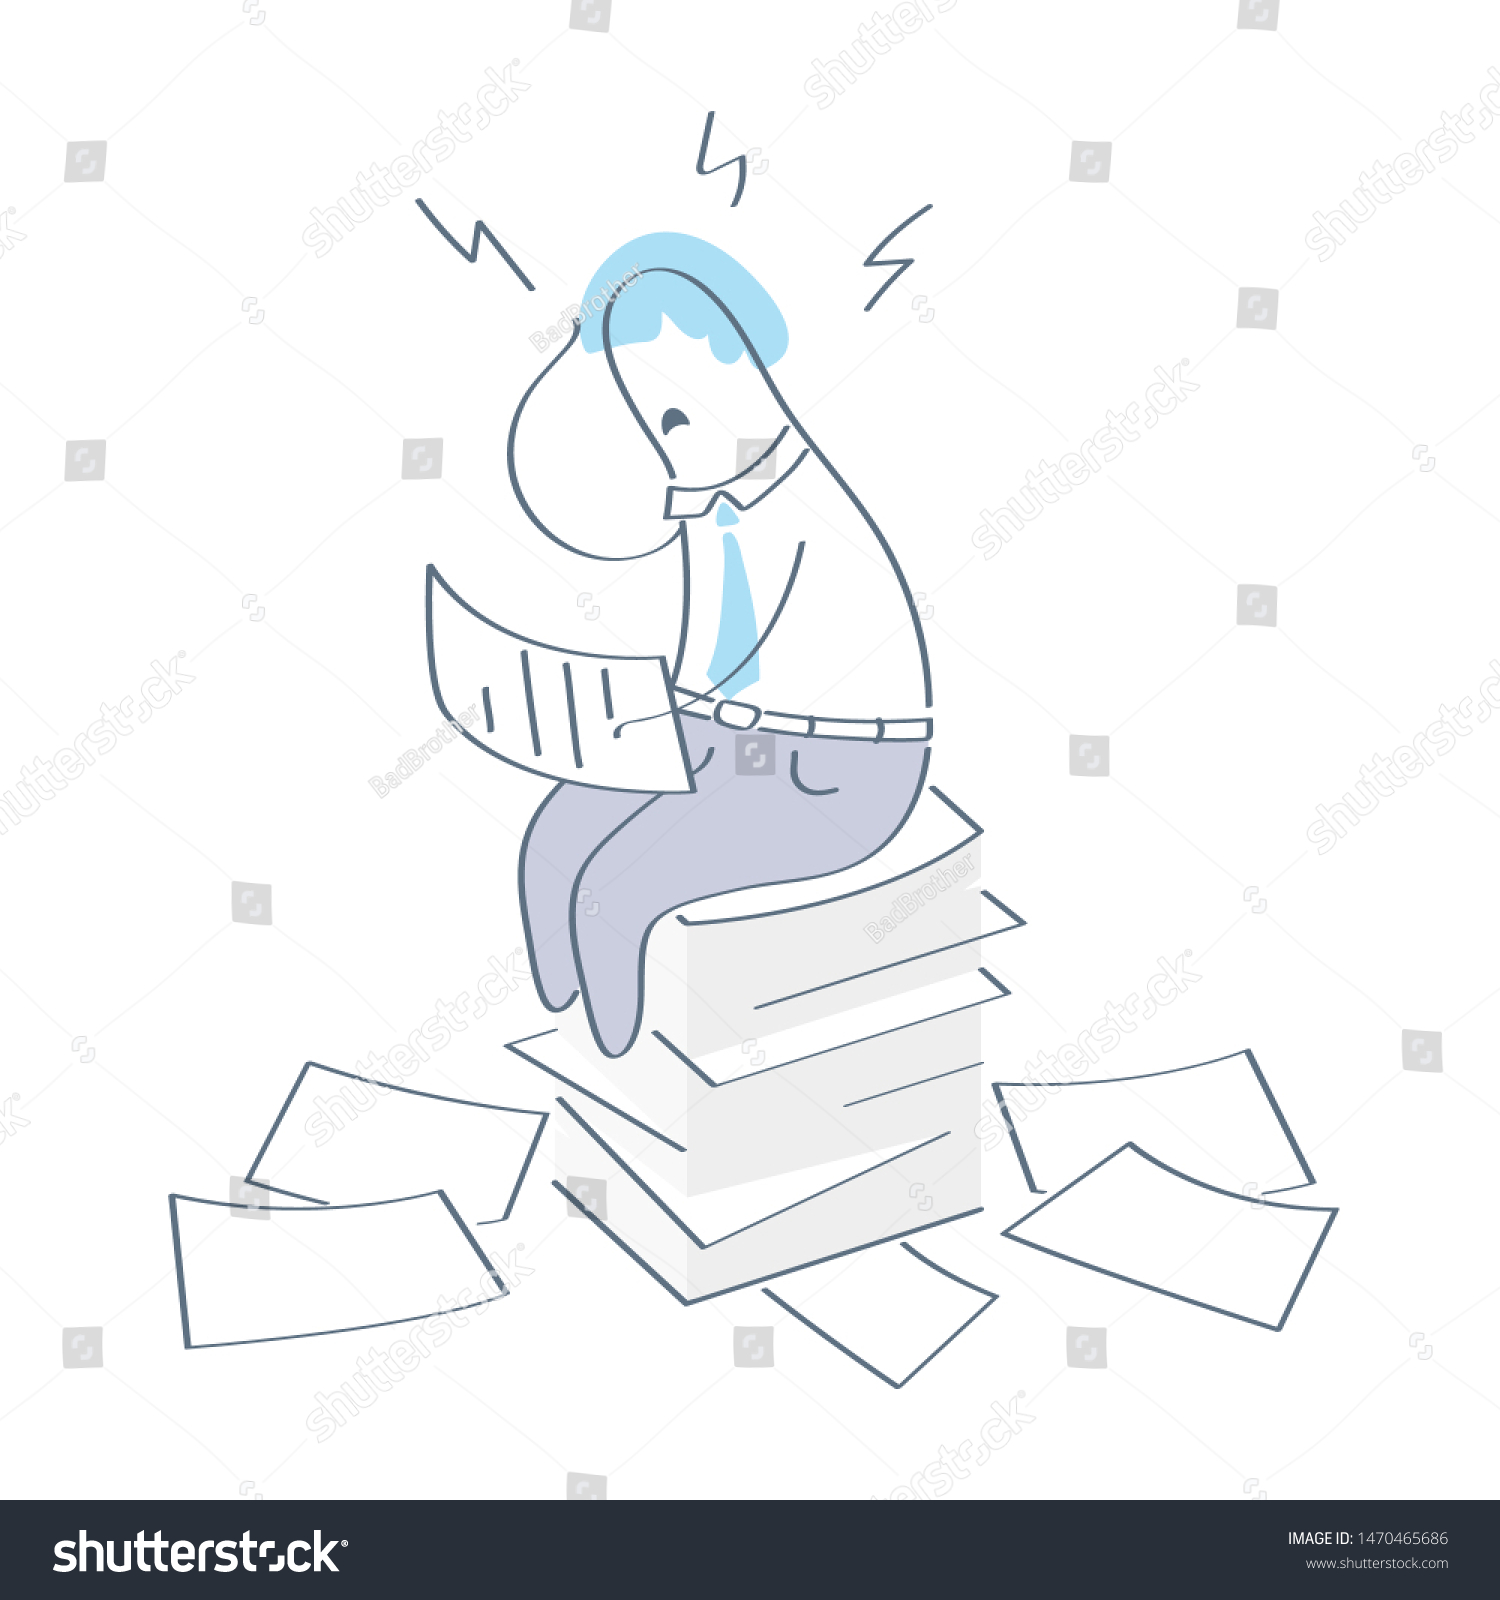 stock-vector-office-stress-overwork-overload-with-paper-work-report-or-education-concept-cute-shocked-1470465686